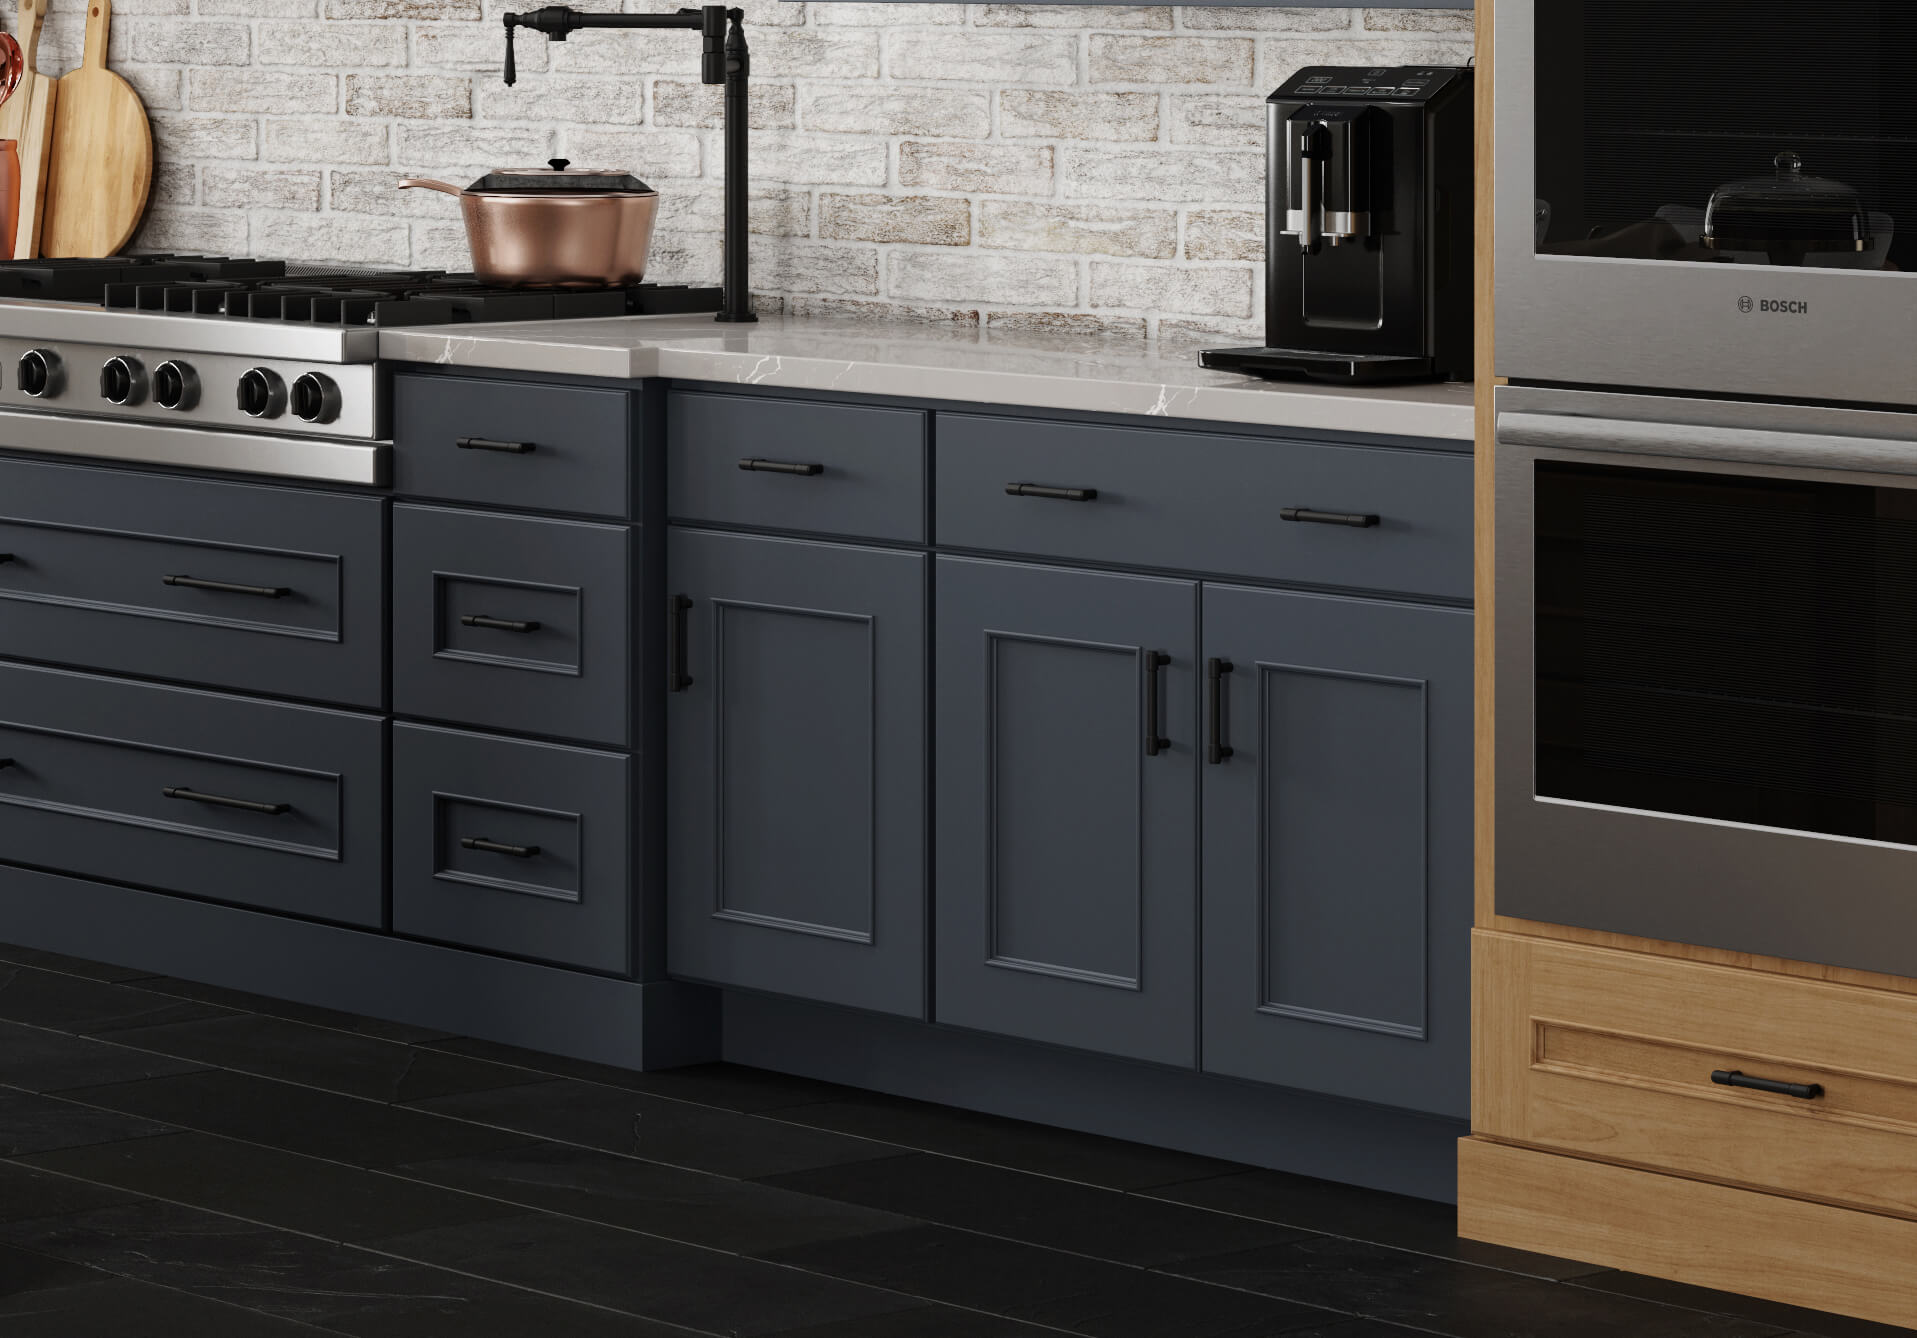 Dark navy blue panted cabinets with warm stained cherry cabinets in an English styled kitchen remodel.